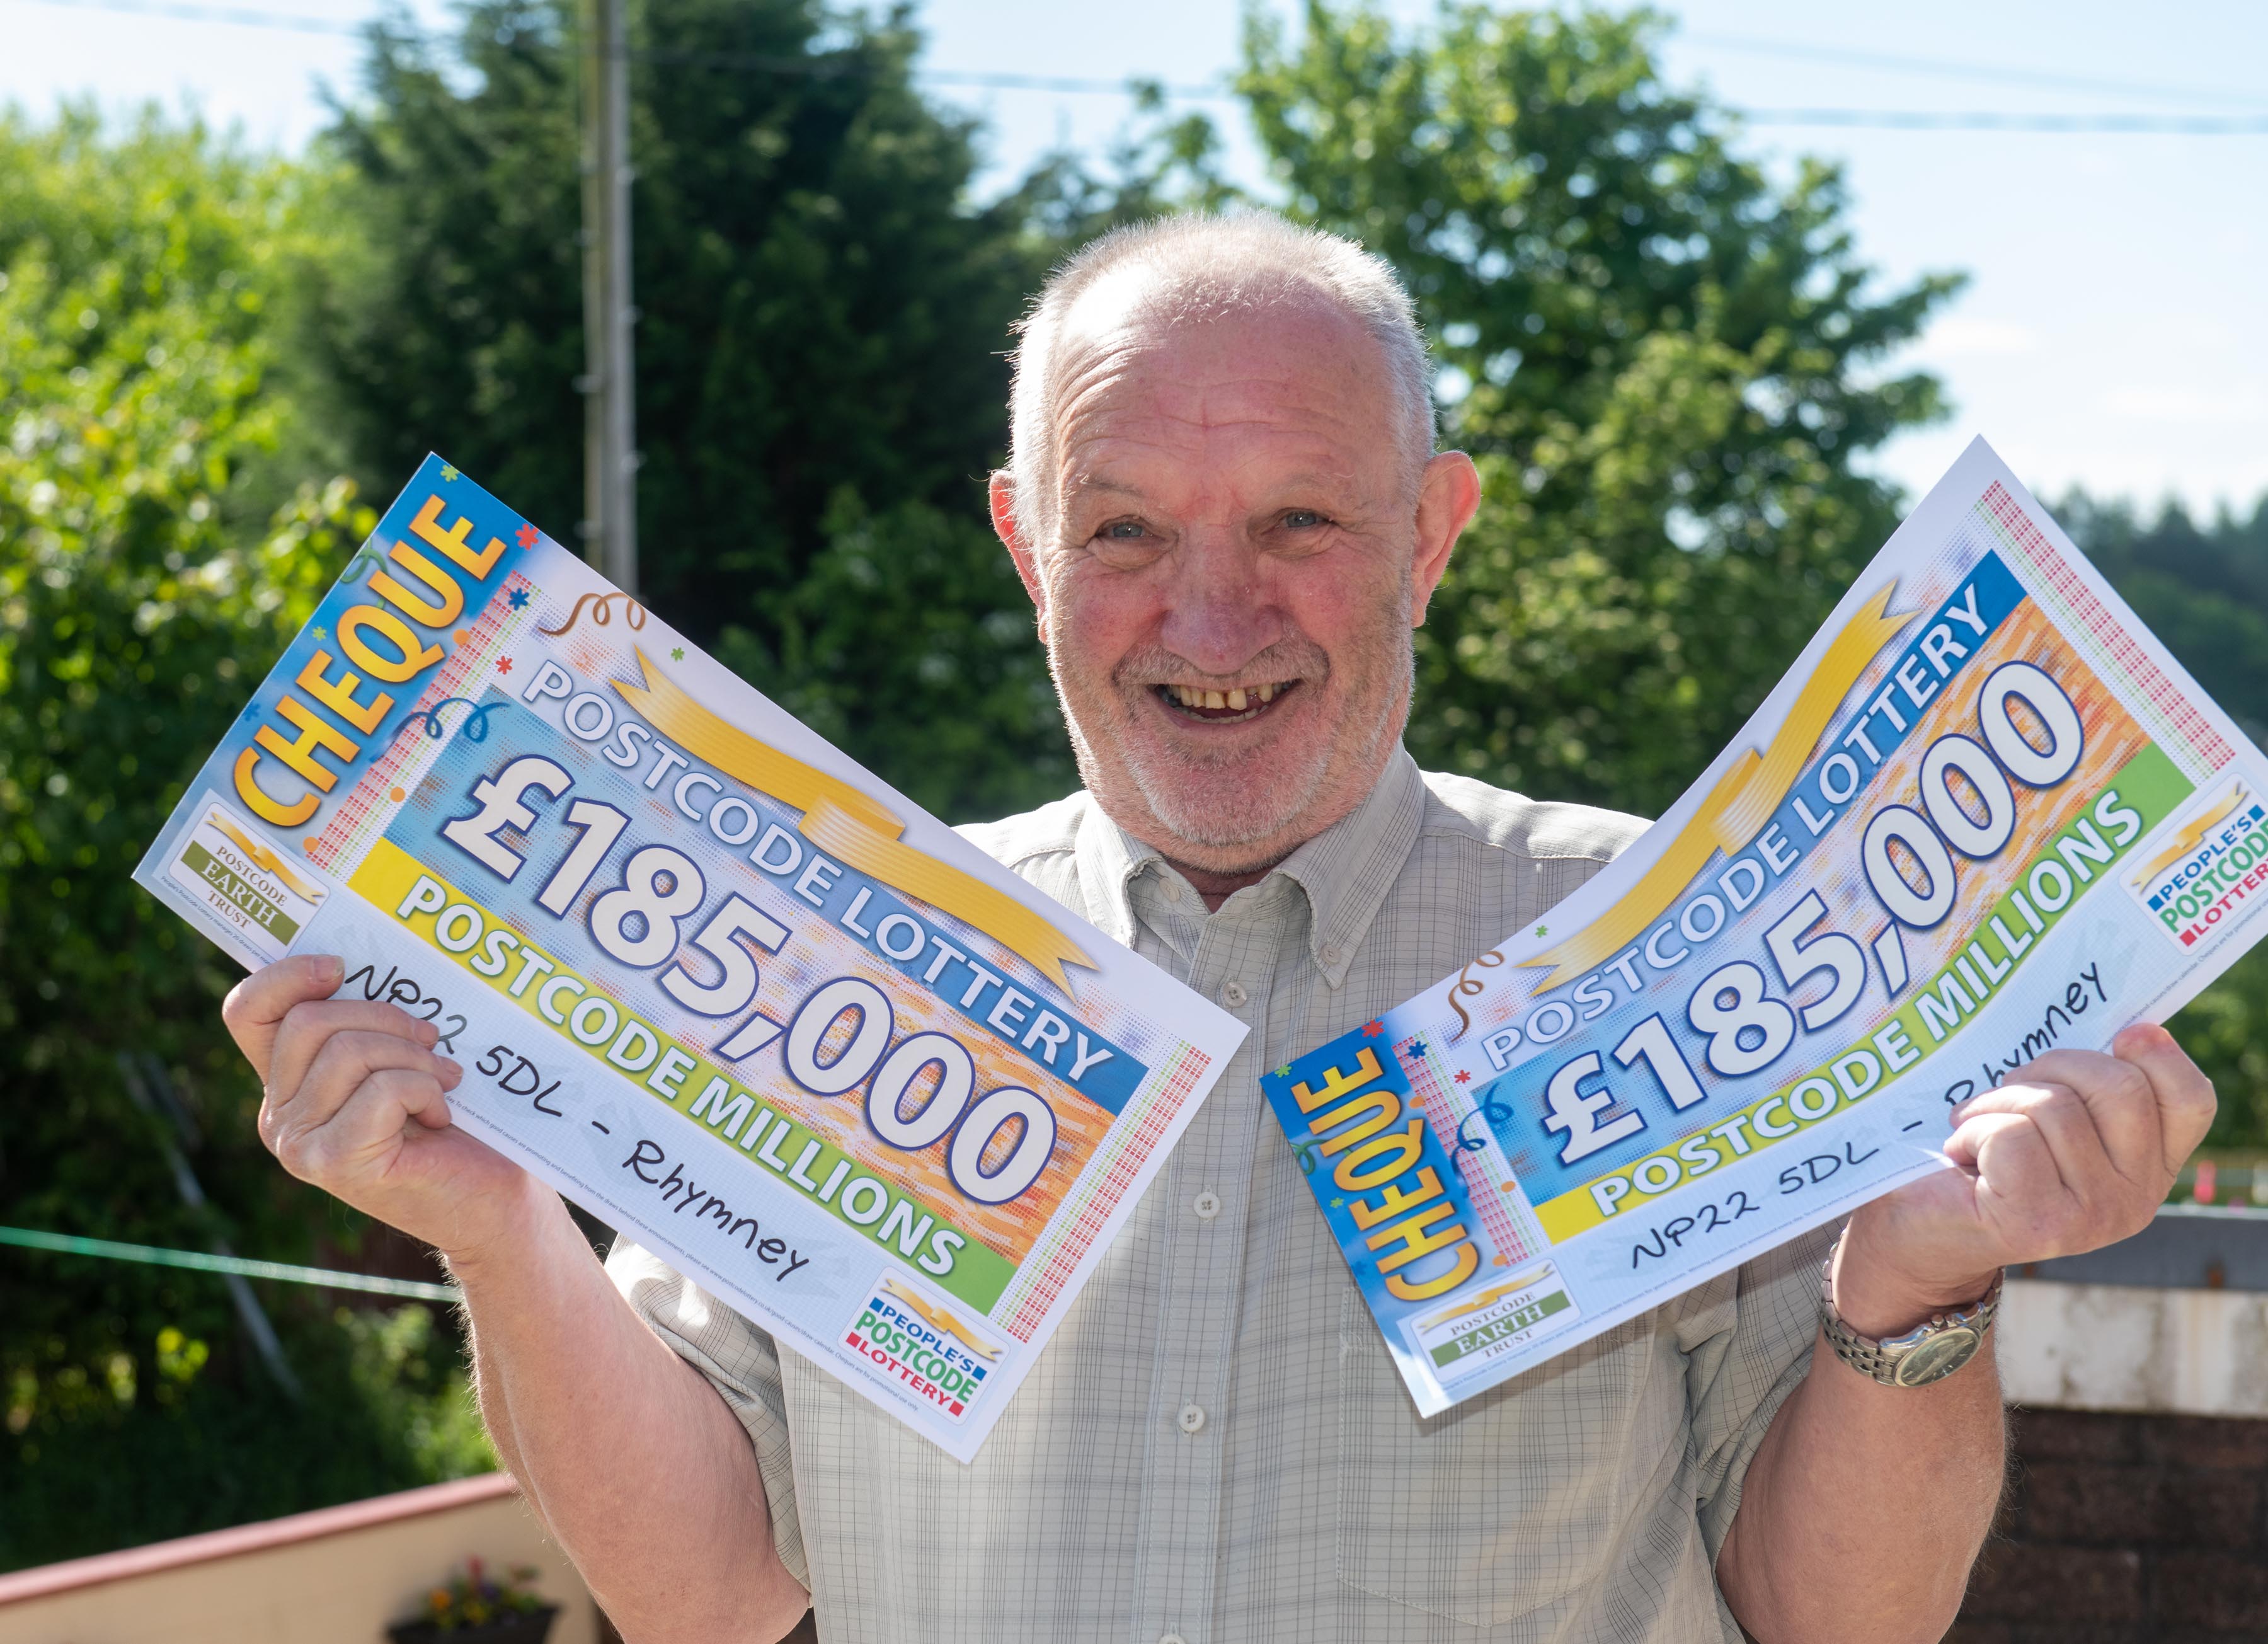 Edward Owen, 76, who played with two tickets, won £370,000 whilst the other eight winners, who each play with one ticket, walked away with £185,000 each.